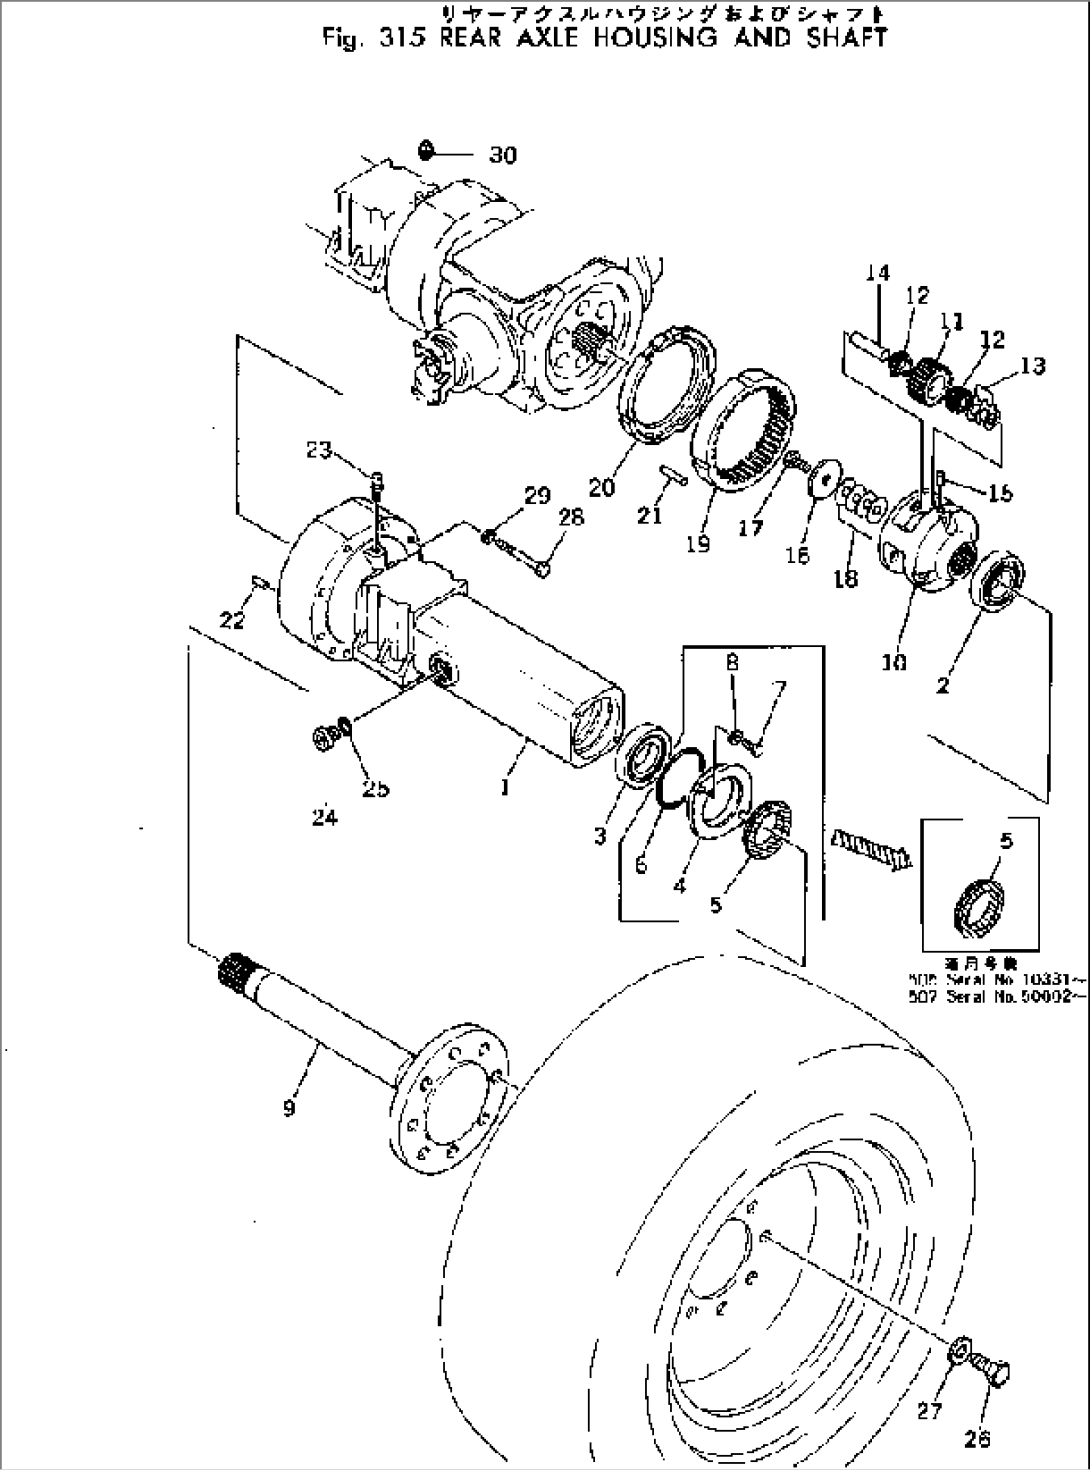 REAR AXLE HOUSING AND SHAFT